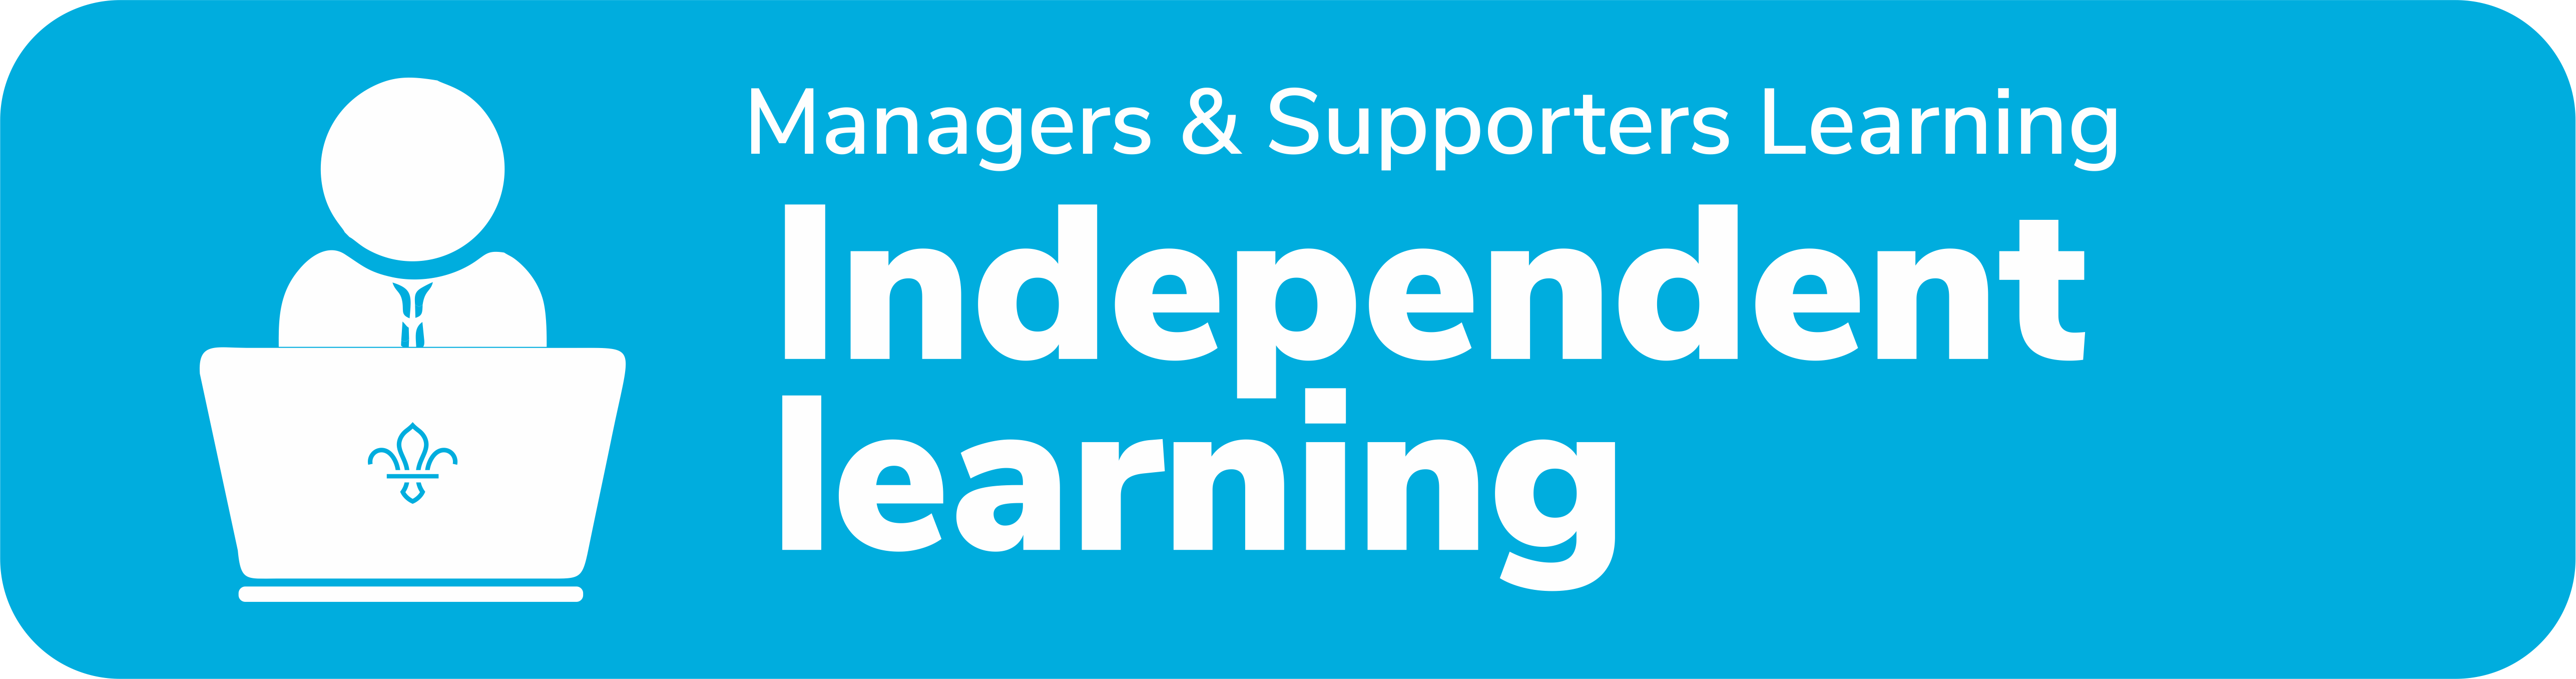 independent learning banner 